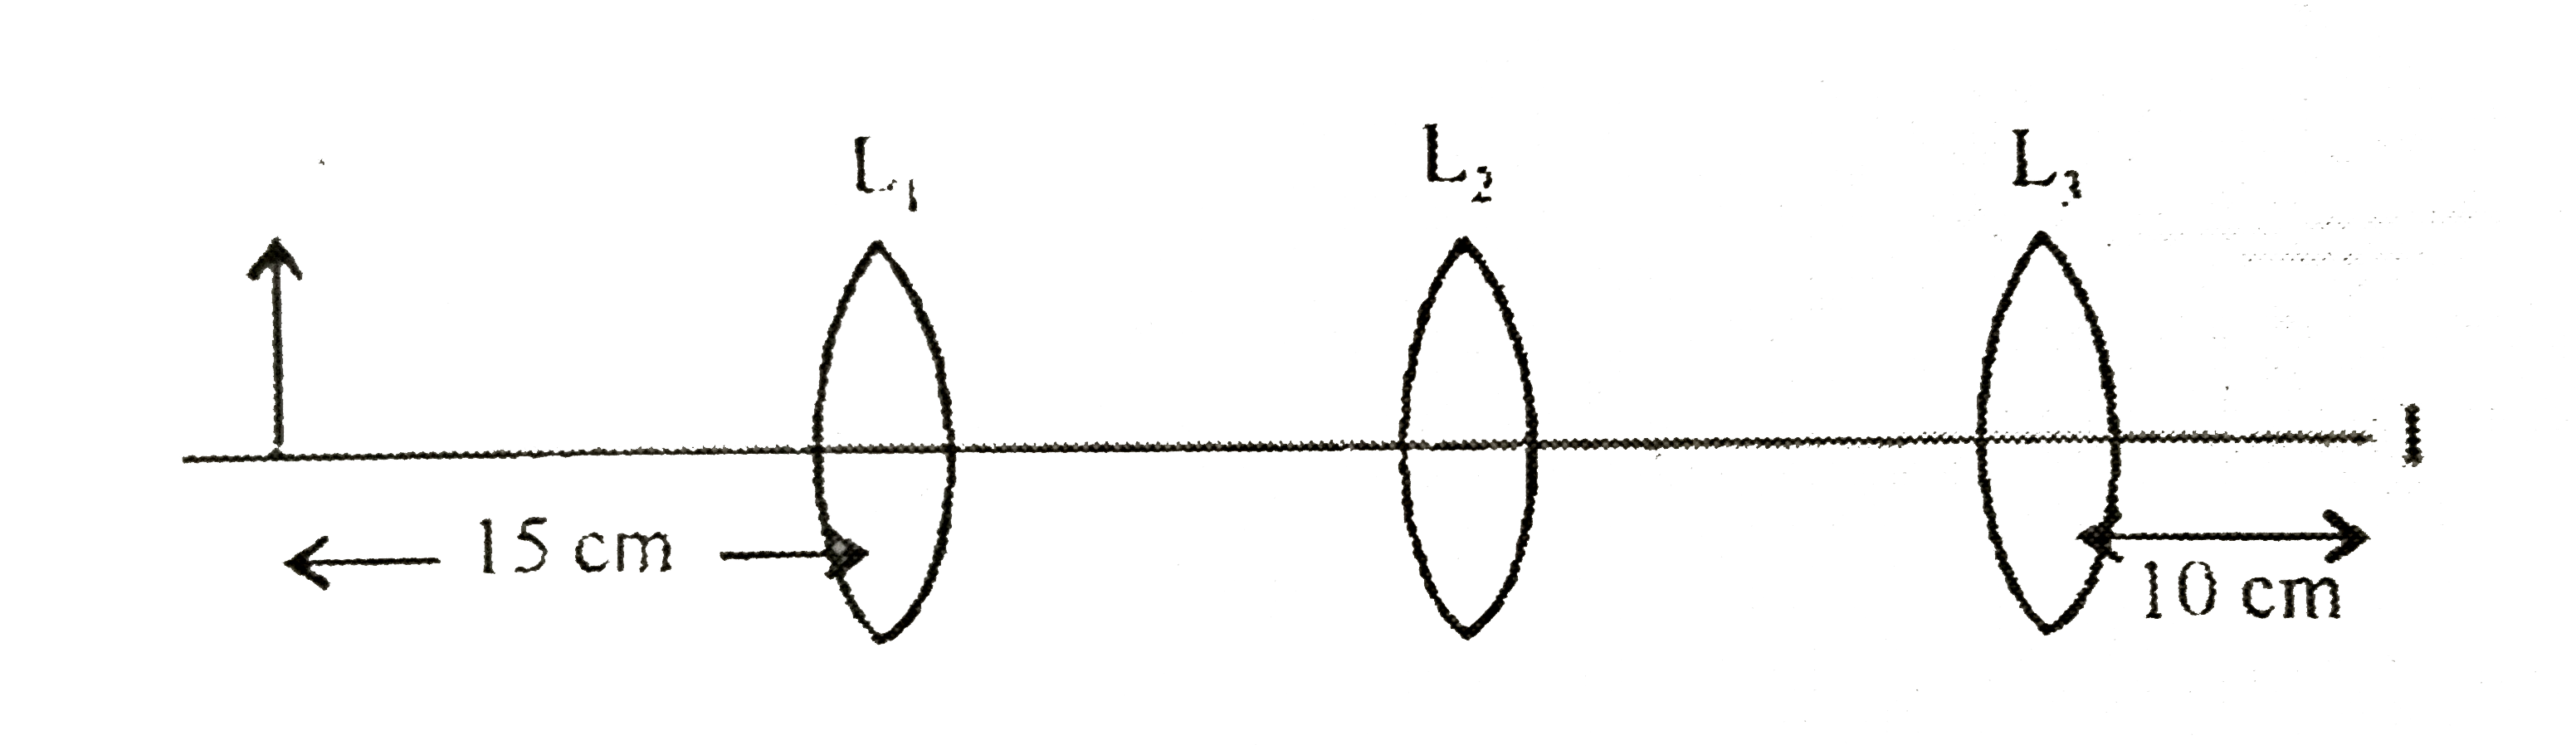 You are given three lenses L(1),L(2) and L(3) each of focal length 10 cm. An object is kept at 15 cm in front of L(1), as shown. The final real image is formed at the focus 'T' of L(3). Find the separations between L(1),L(2) and L(3).